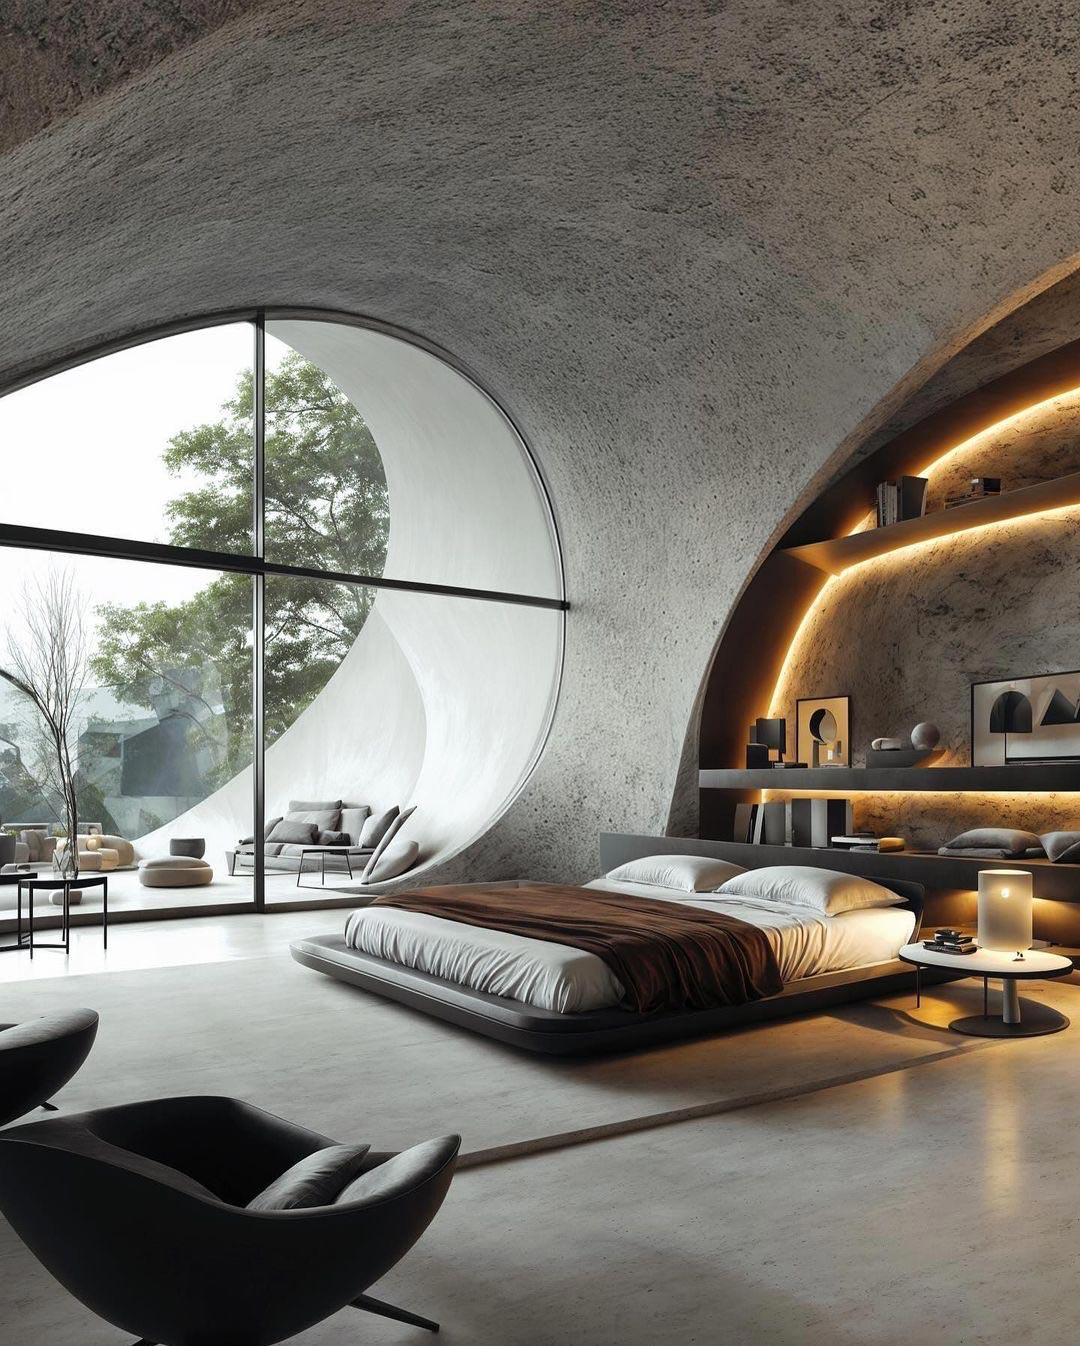 Abstract-Shaped Home Design Large curved windows with low base bed